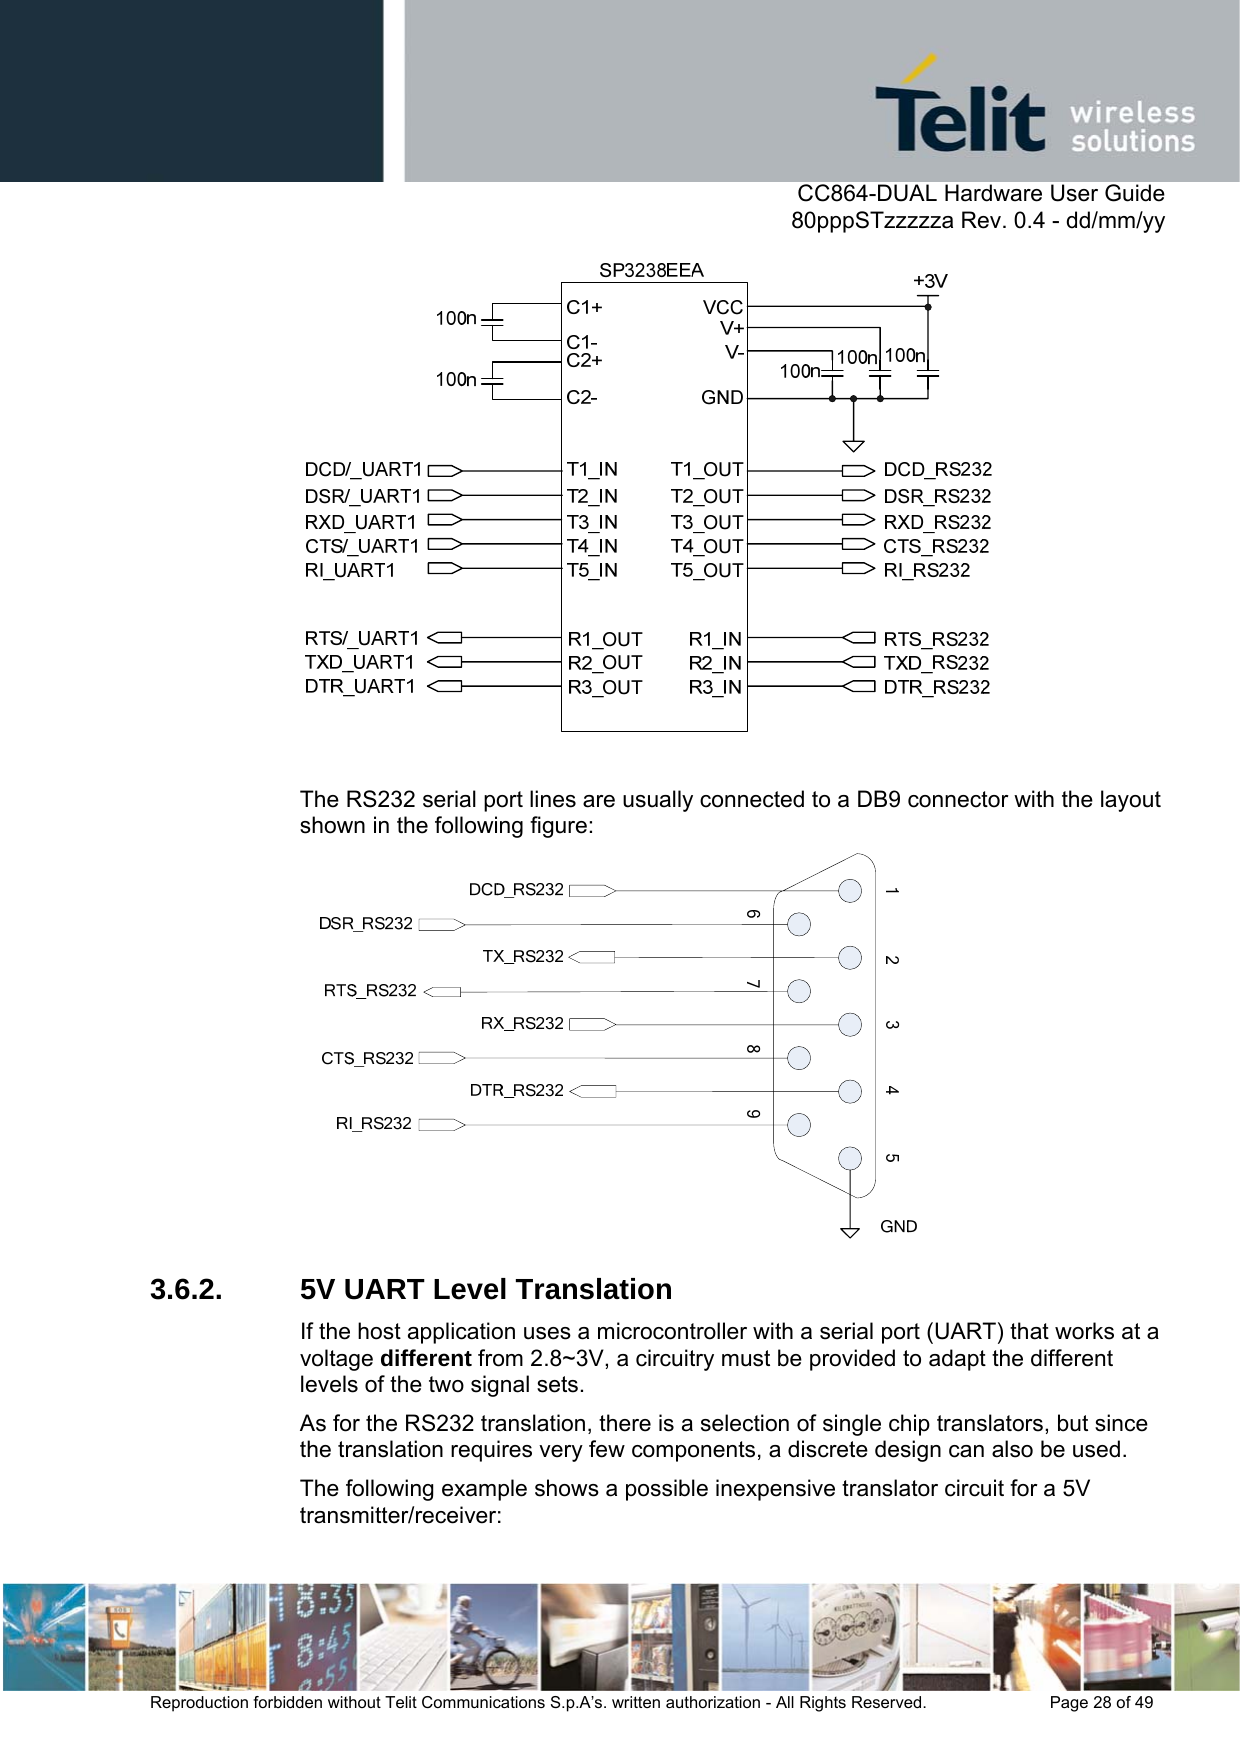      CC864-DUAL Hardware User Guide   80pppSTzzzzza Rev. 0.4 - dd/mm/yy   Reproduction forbidden without Telit Communications S.p.A’s. written authorization - All Rights Reserved.    Page 28 of 49    The RS232 serial port lines are usually connected to a DB9 connector with the layout shown in the following figure:  3.6.2.  5V UART Level Translation If the host application uses a microcontroller with a serial port (UART) that works at a voltage different from 2.8~3V, a circuitry must be provided to adapt the different levels of the two signal sets. As for the RS232 translation, there is a selection of single chip translators, but since the translation requires very few components, a discrete design can also be used. The following example shows a possible inexpensive translator circuit for a 5V transmitter/receiver: 